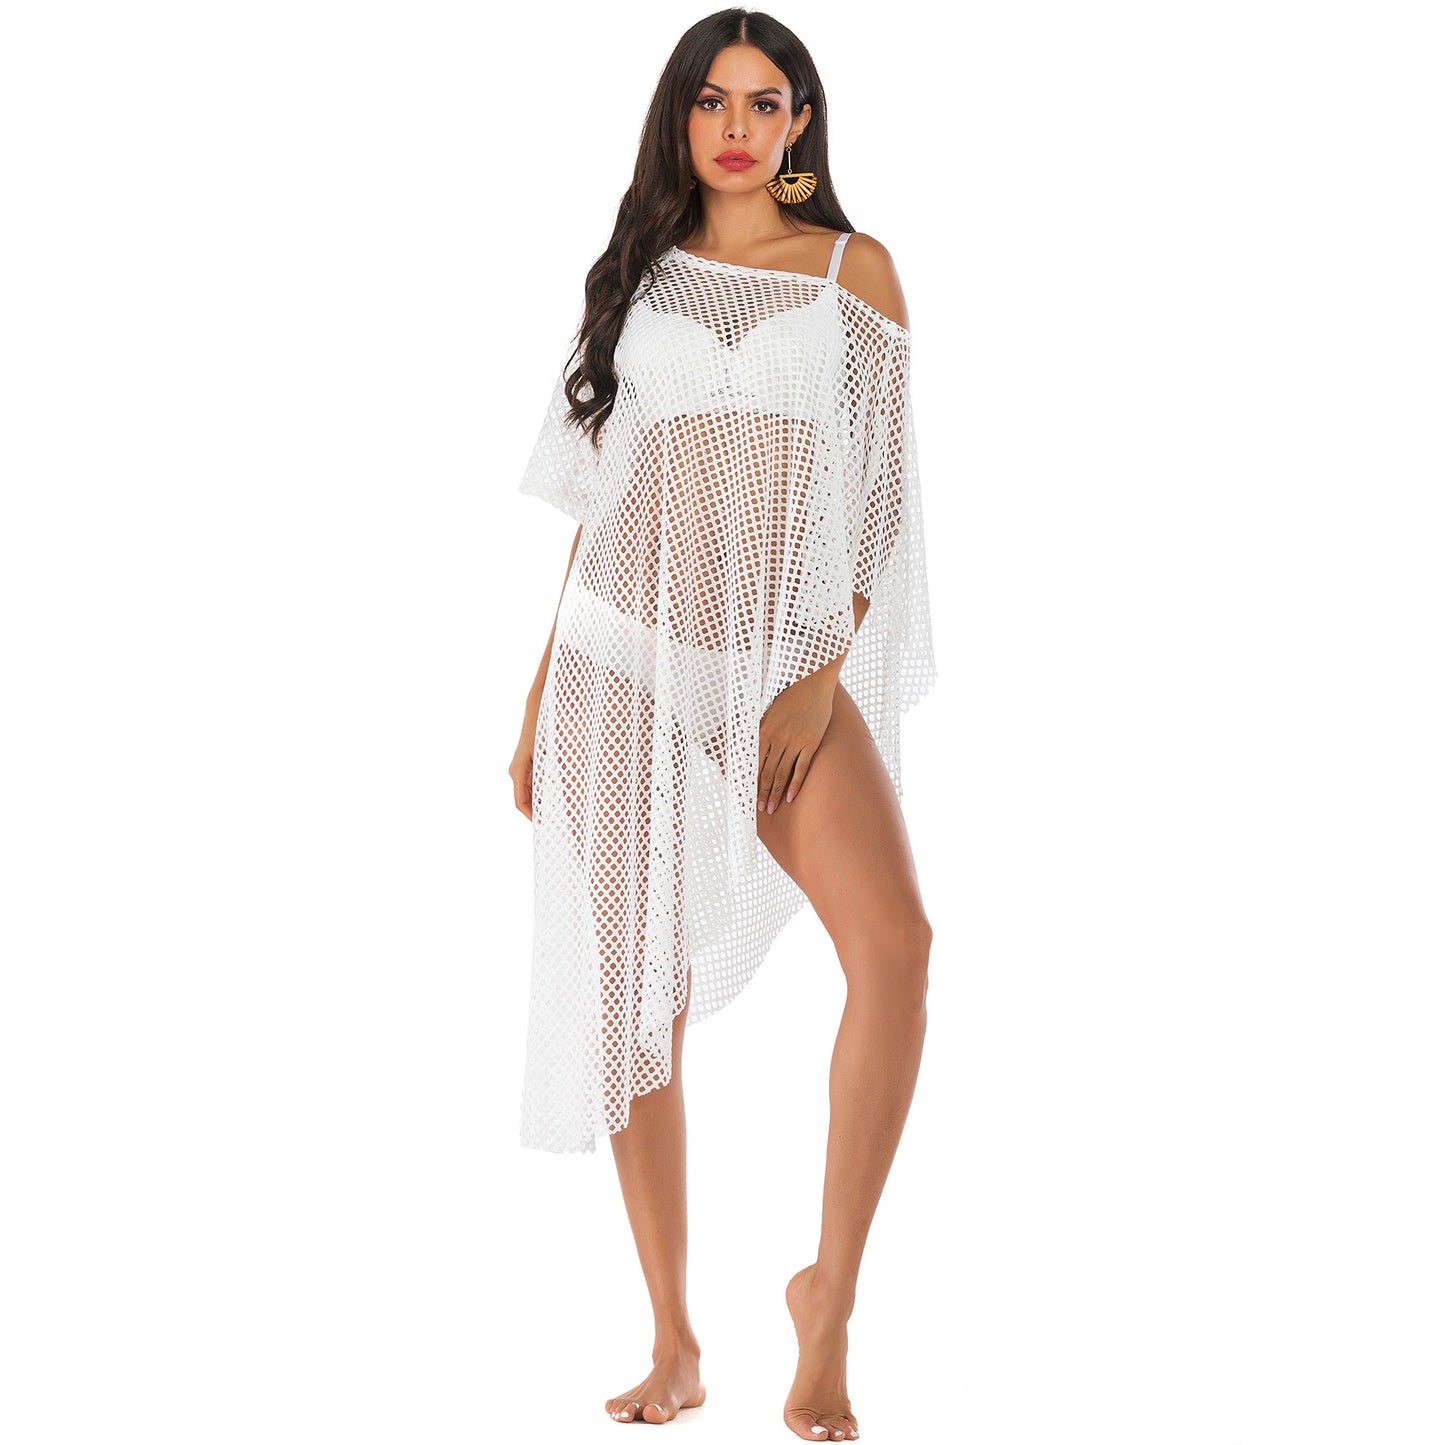 Irregular Off The Shoulder See Through Summer Beach Cover Ups-Swimwear-White-One Size-Free Shipping at meselling99